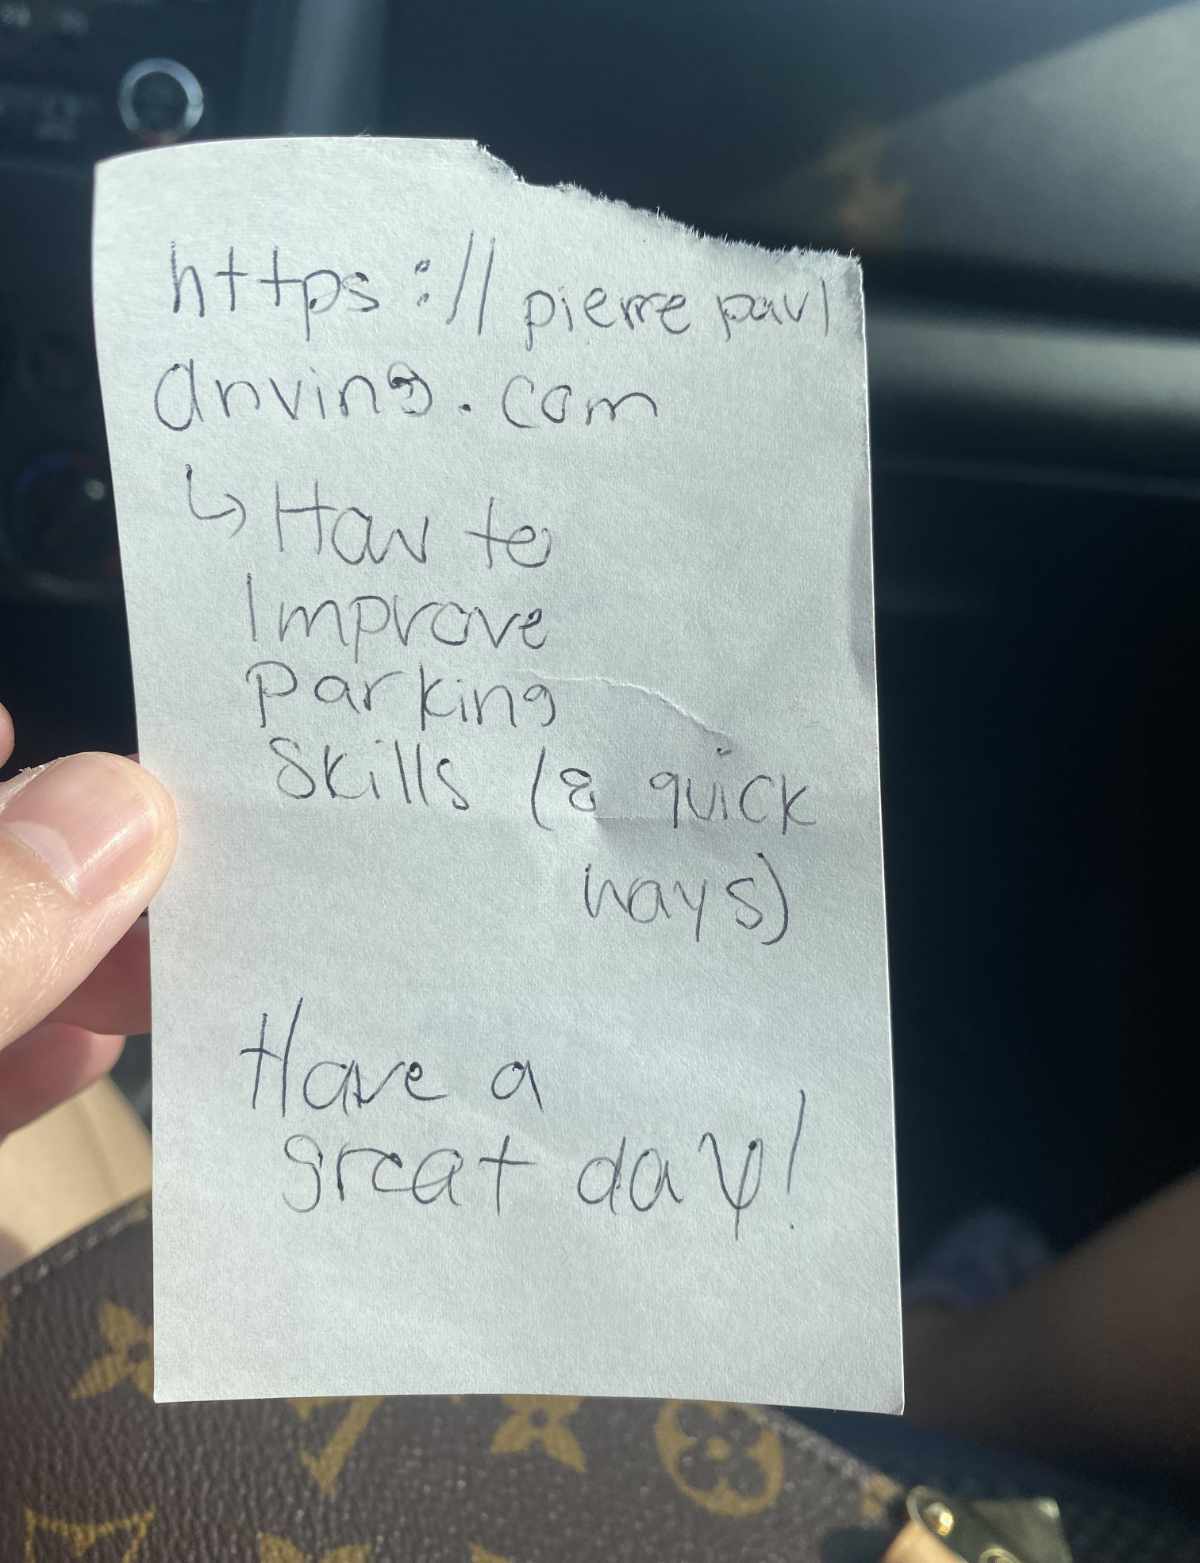 Cool Stuff, someone left this on my husband’s car